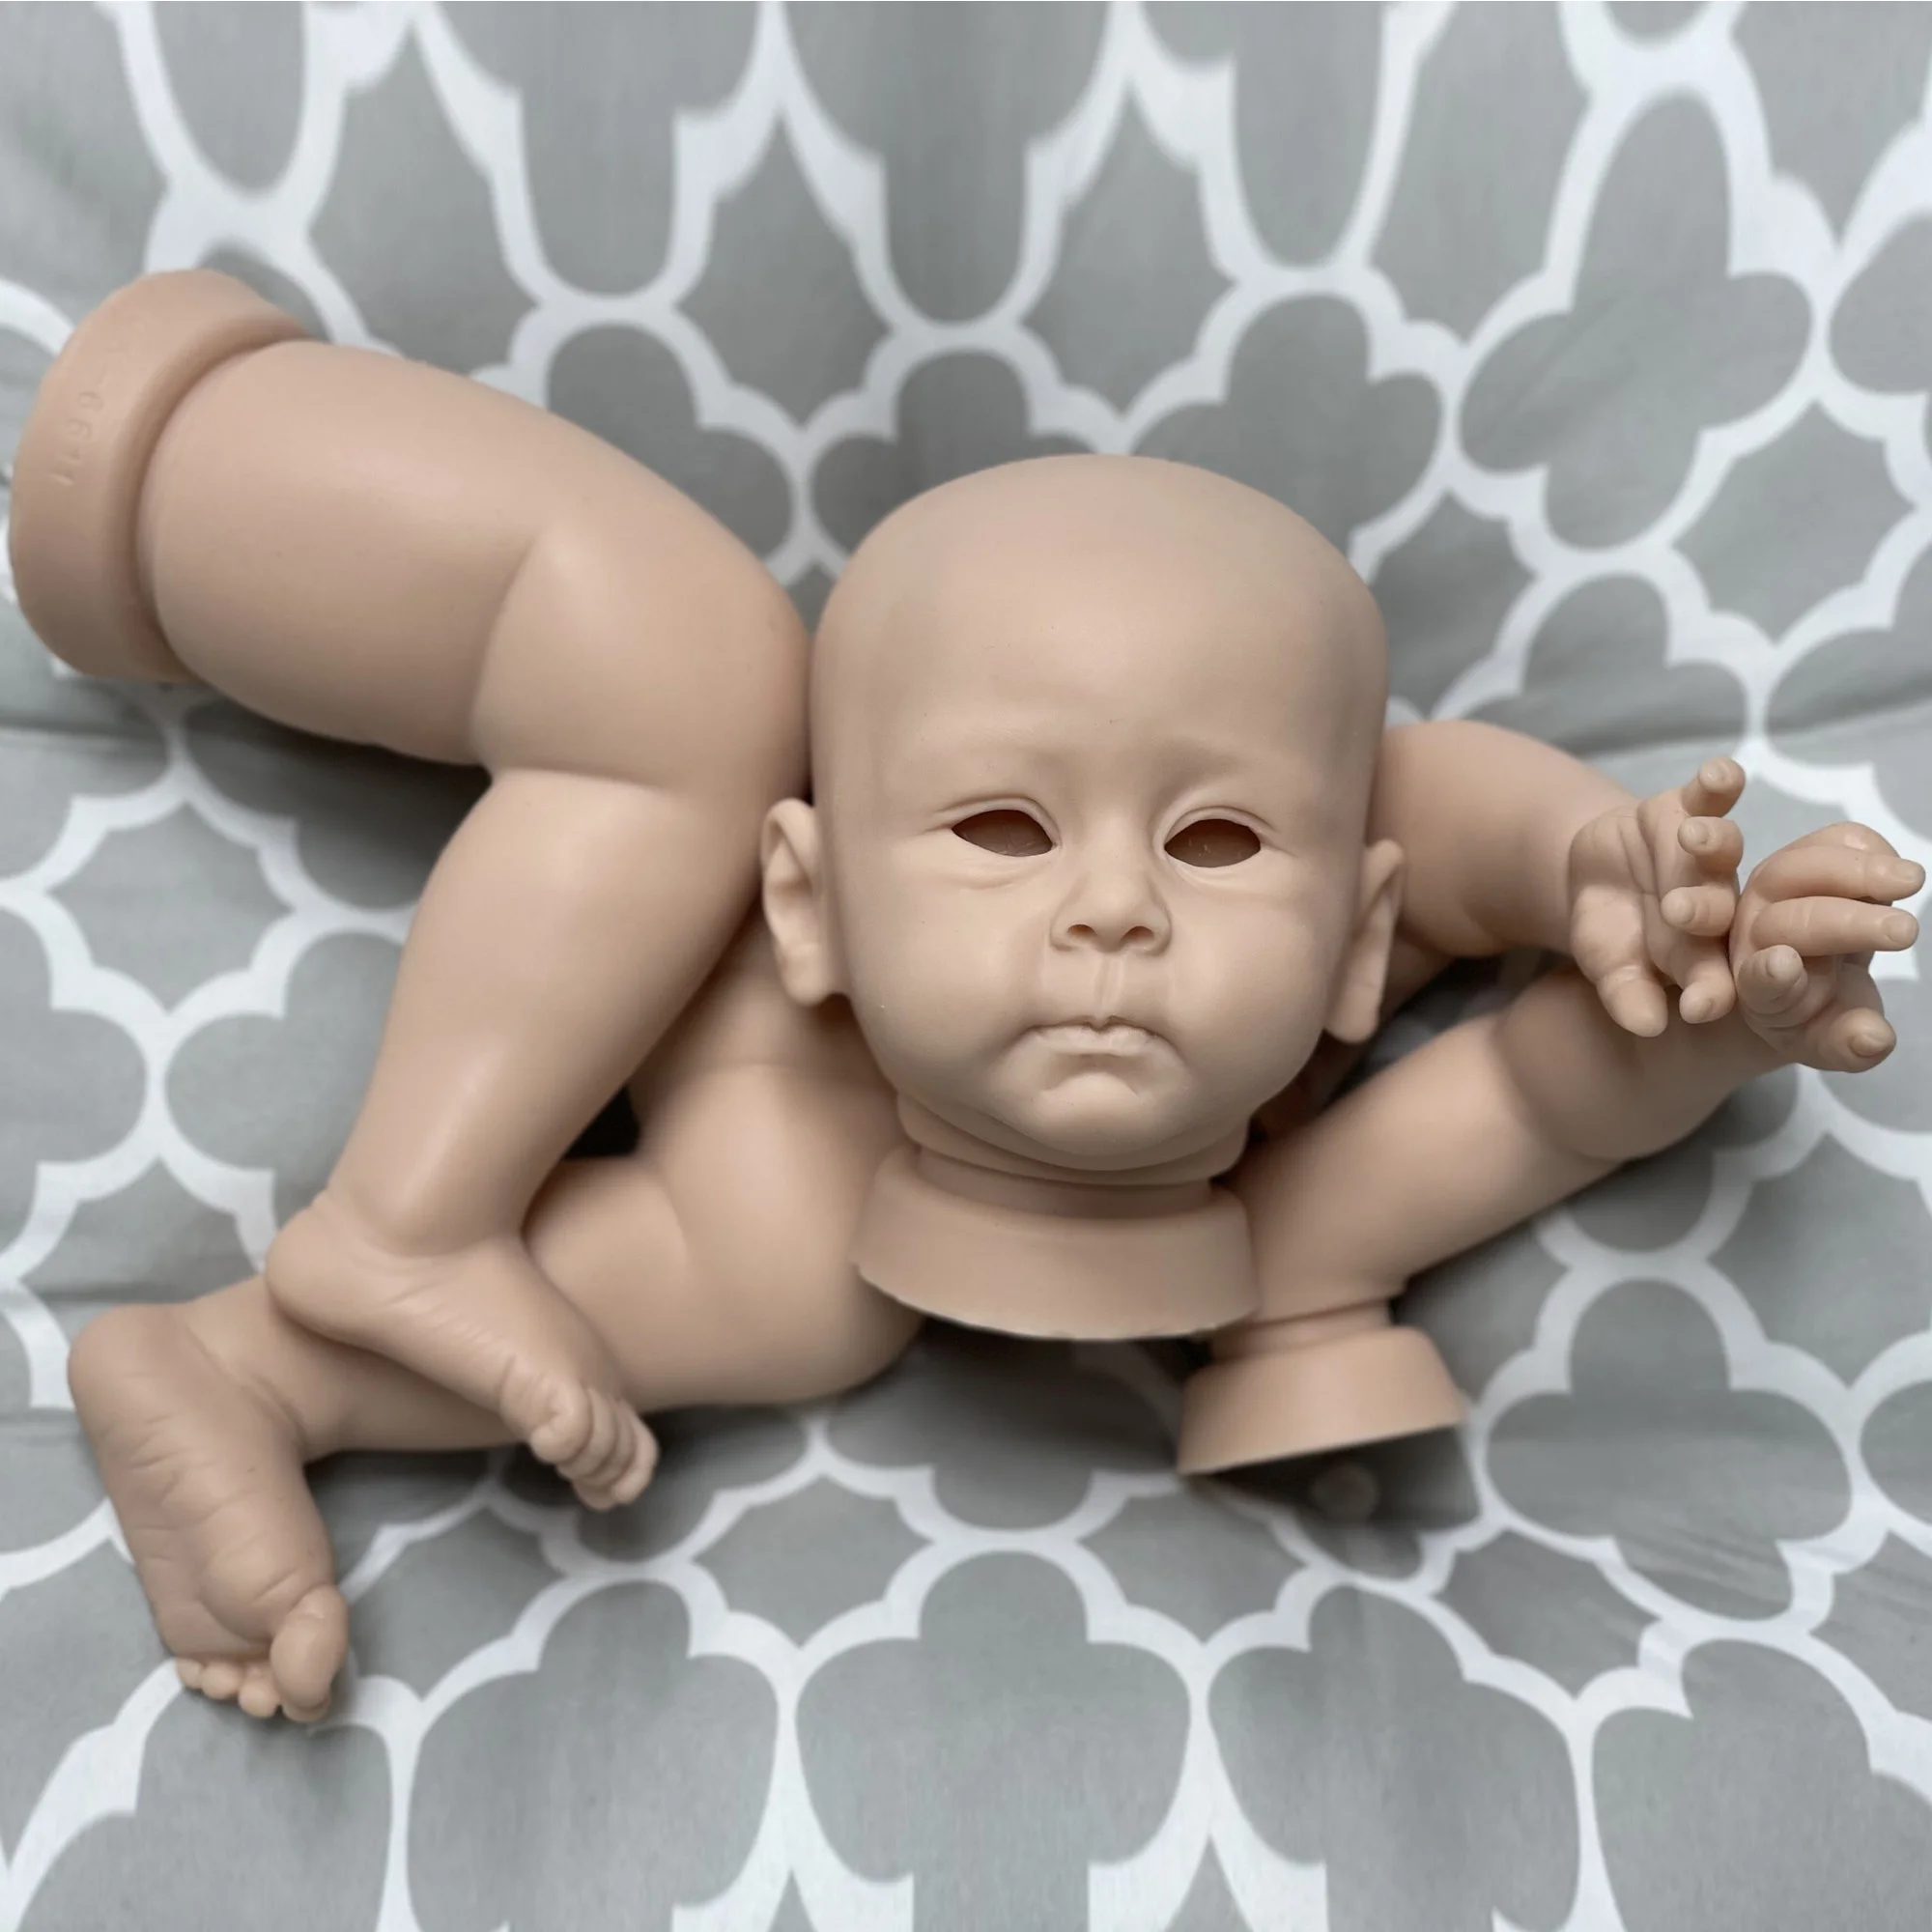 

20-22Inch Huxley Solid Silicone Bebe Reborn Doll Kits DIY Blank Unpainted Unfinished Parts Soft Silicona Muñeca